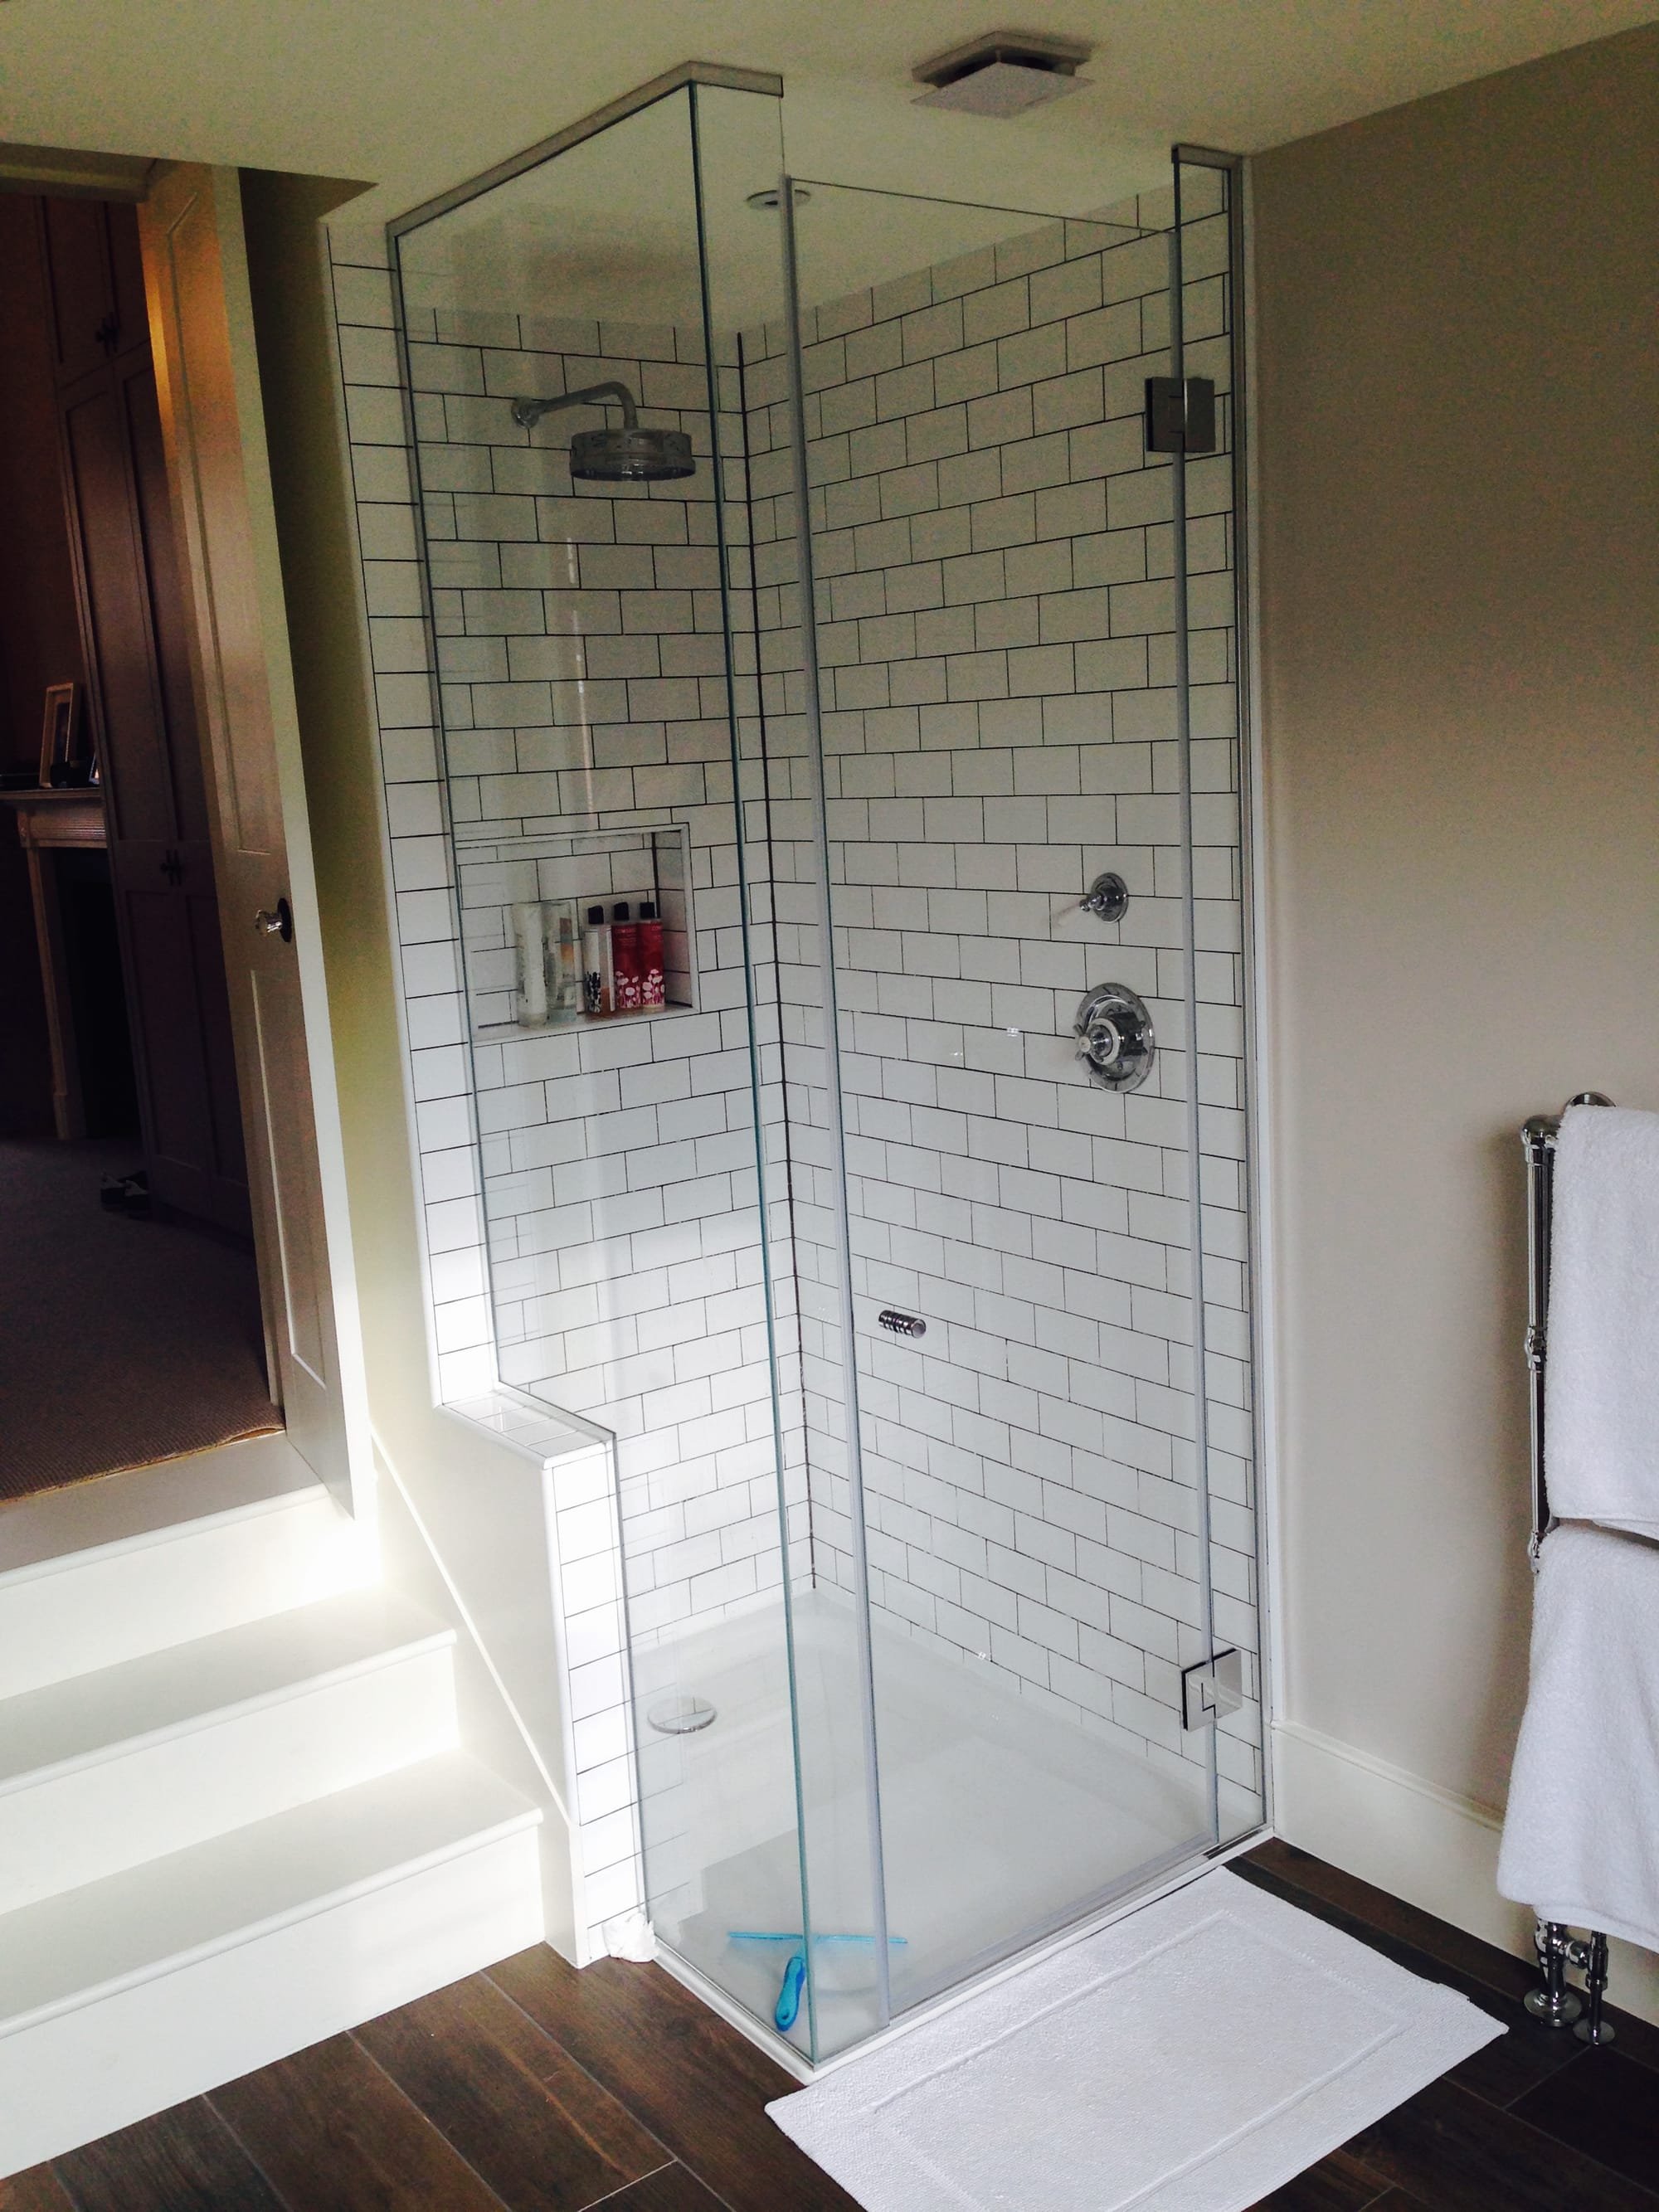 Metro tiles with contrast grout and bespoke glass shower screen to this split level master en-suite in SW17